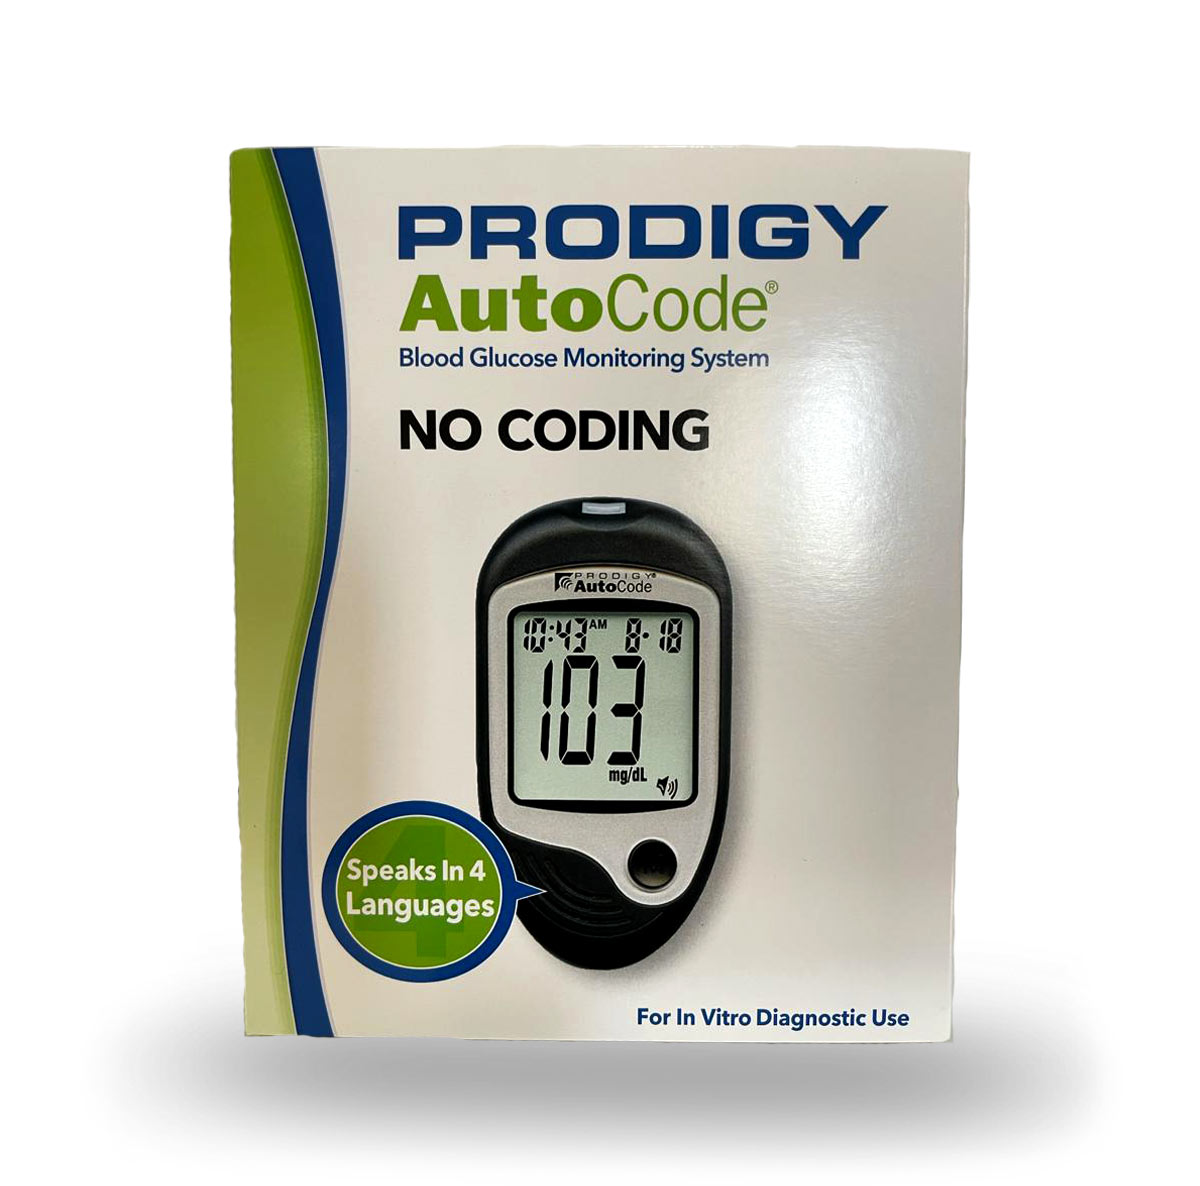 Prodigy Diabetic Blood Glucose speaking Meter. No Coding. 